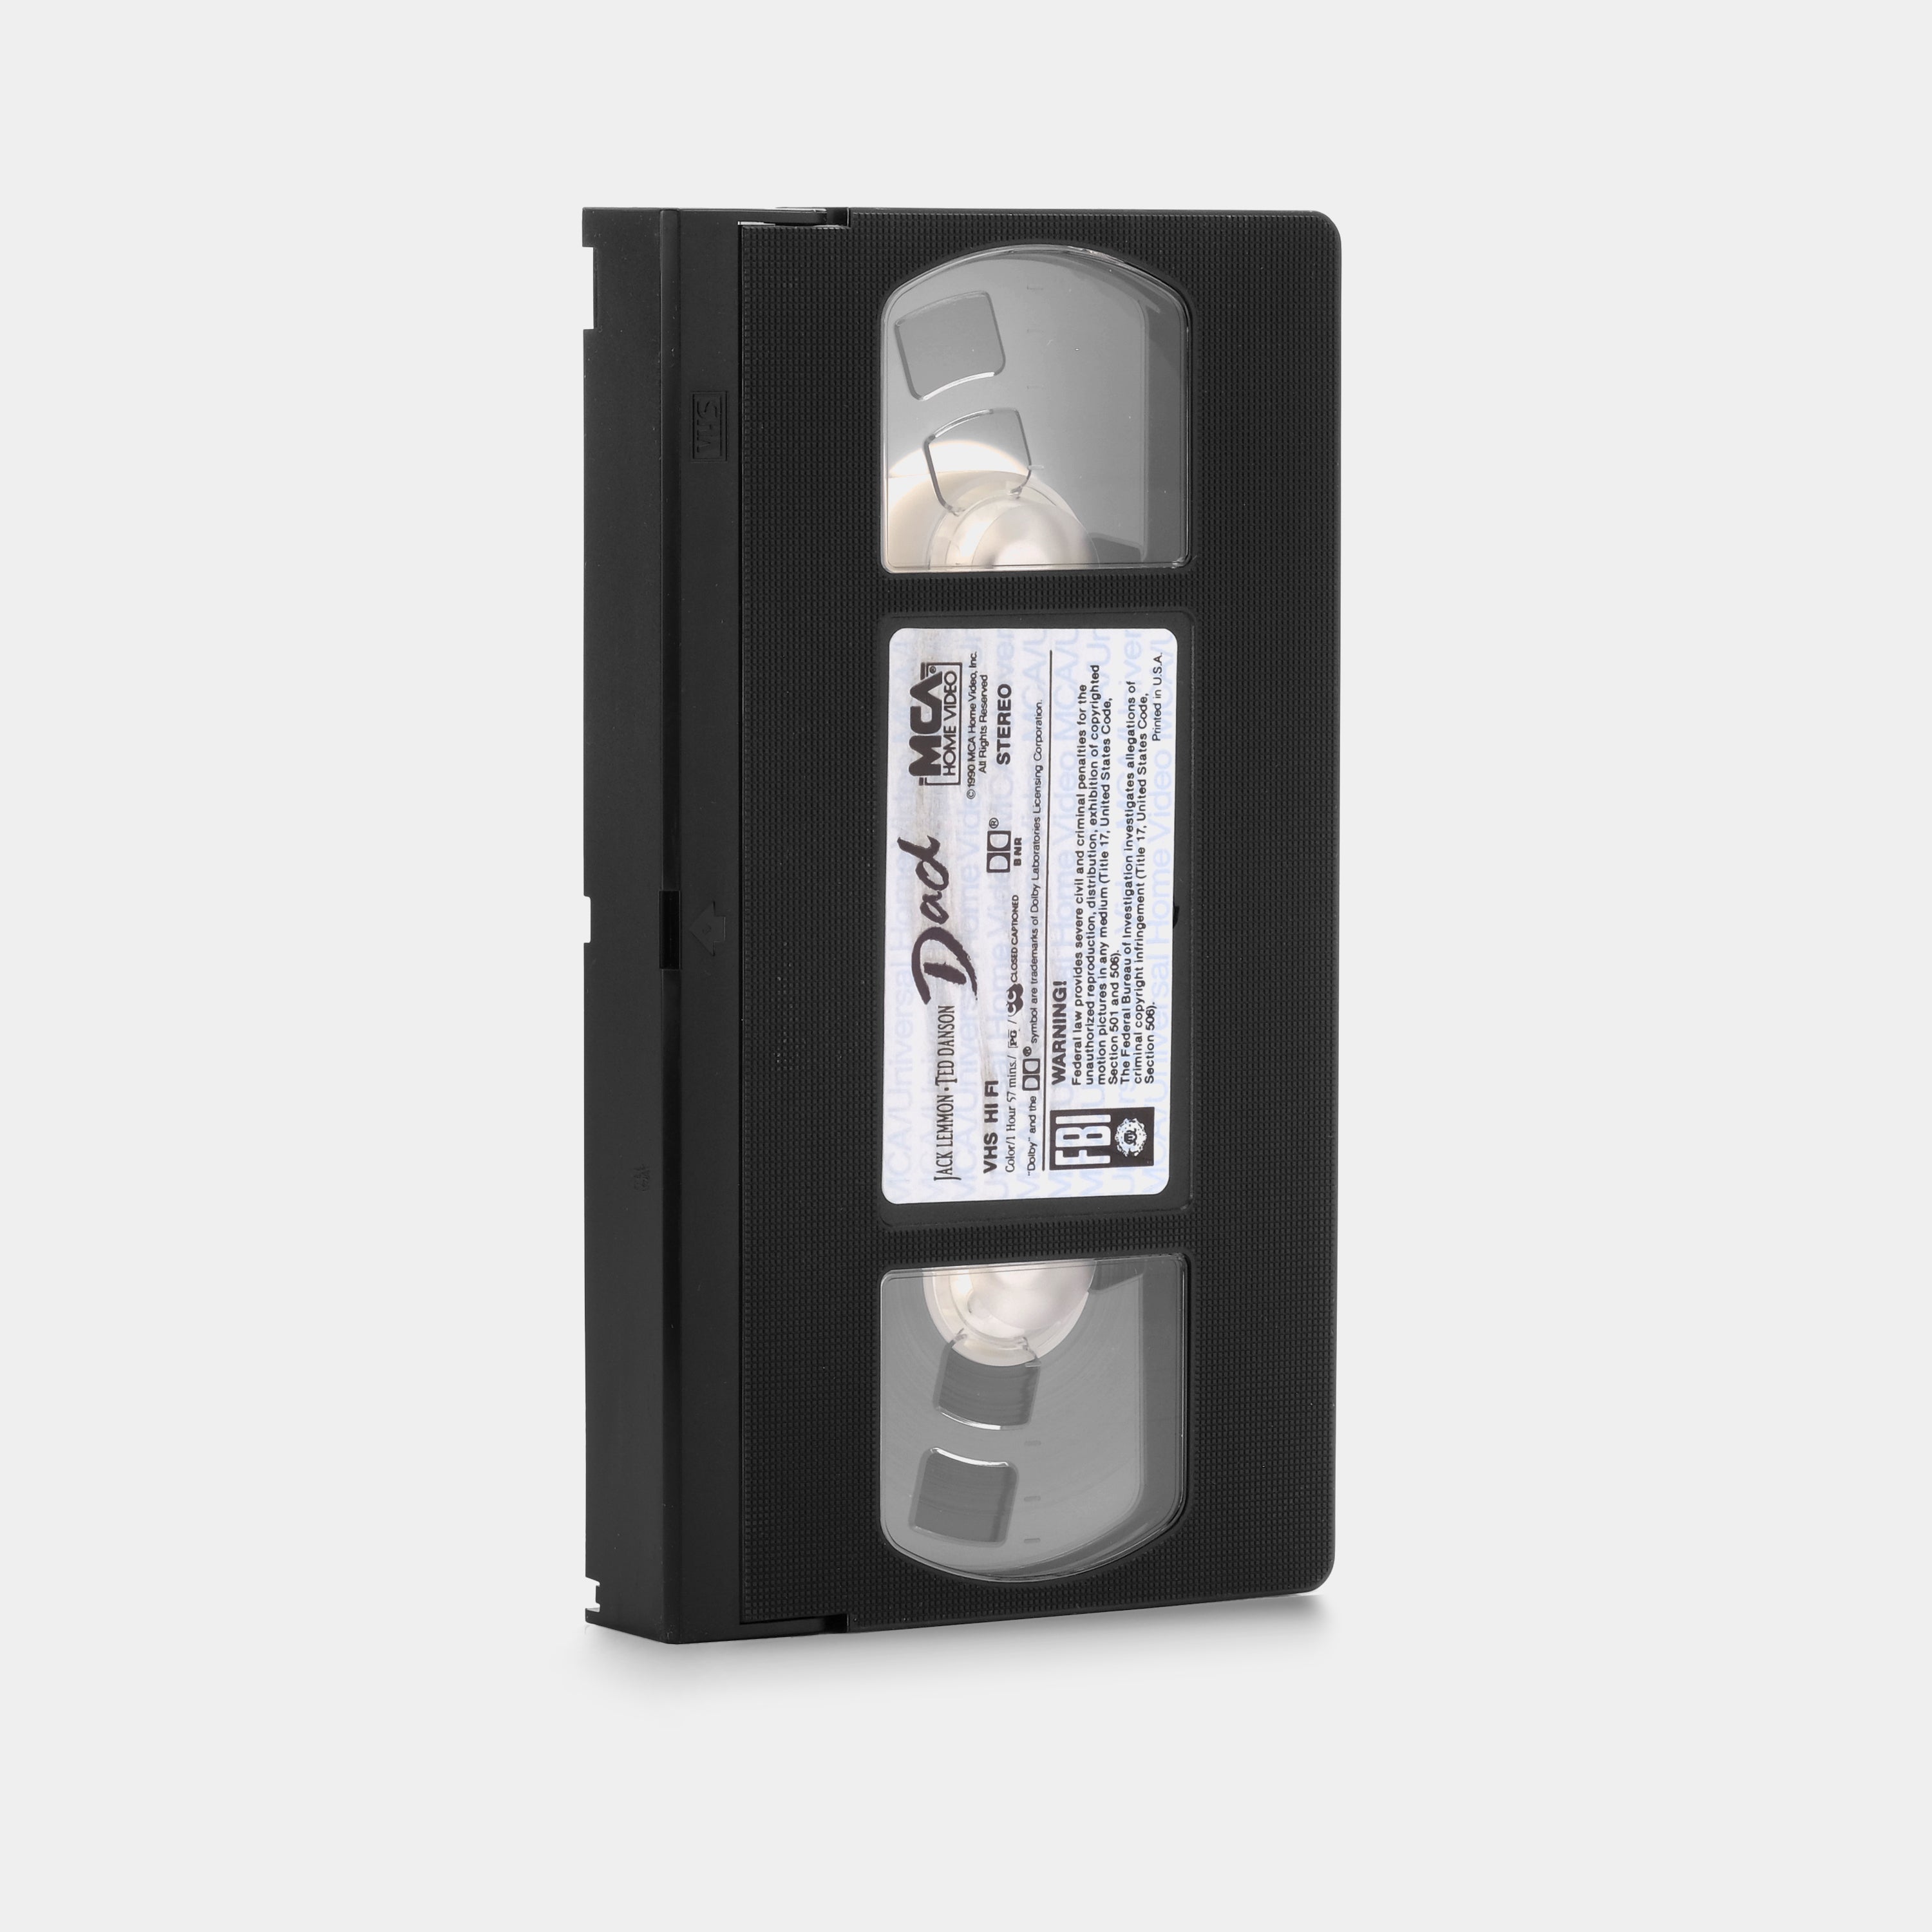 Dad VHS Tape